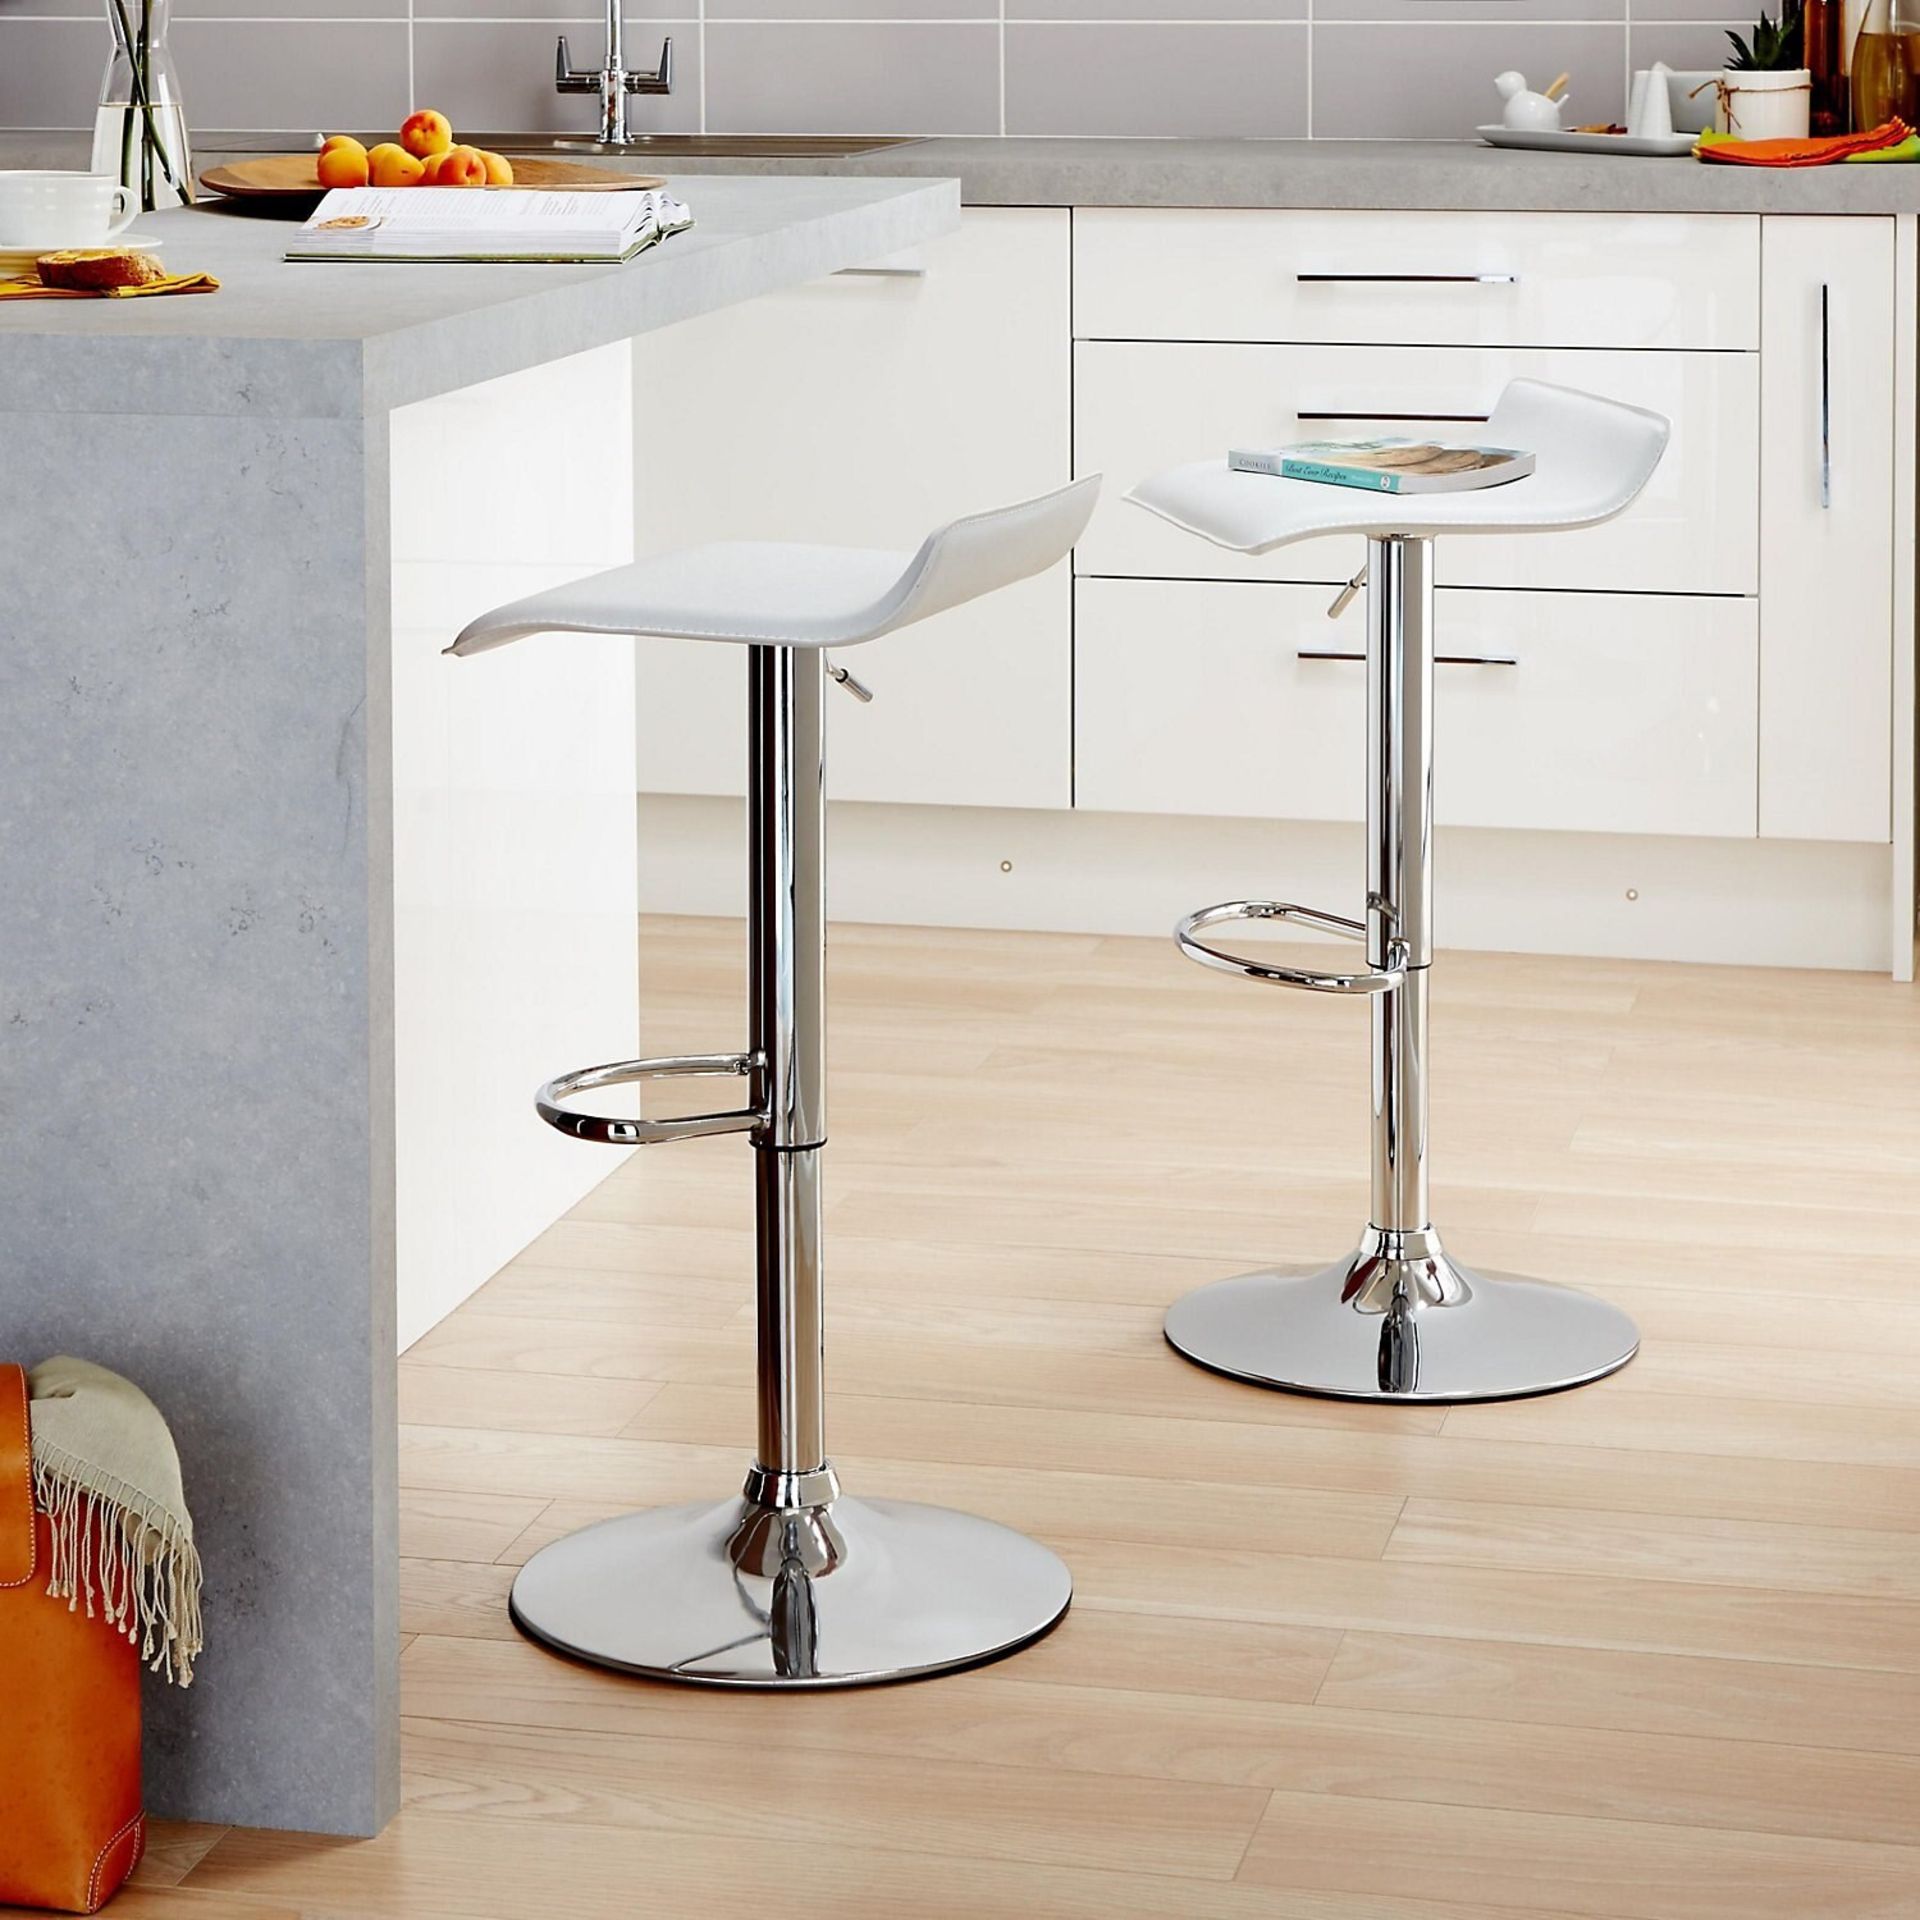 2 x White & Chrome effect Bar stool (H)850mm (W)415mm, Pack of 2.Bar Stools are a great way to ...